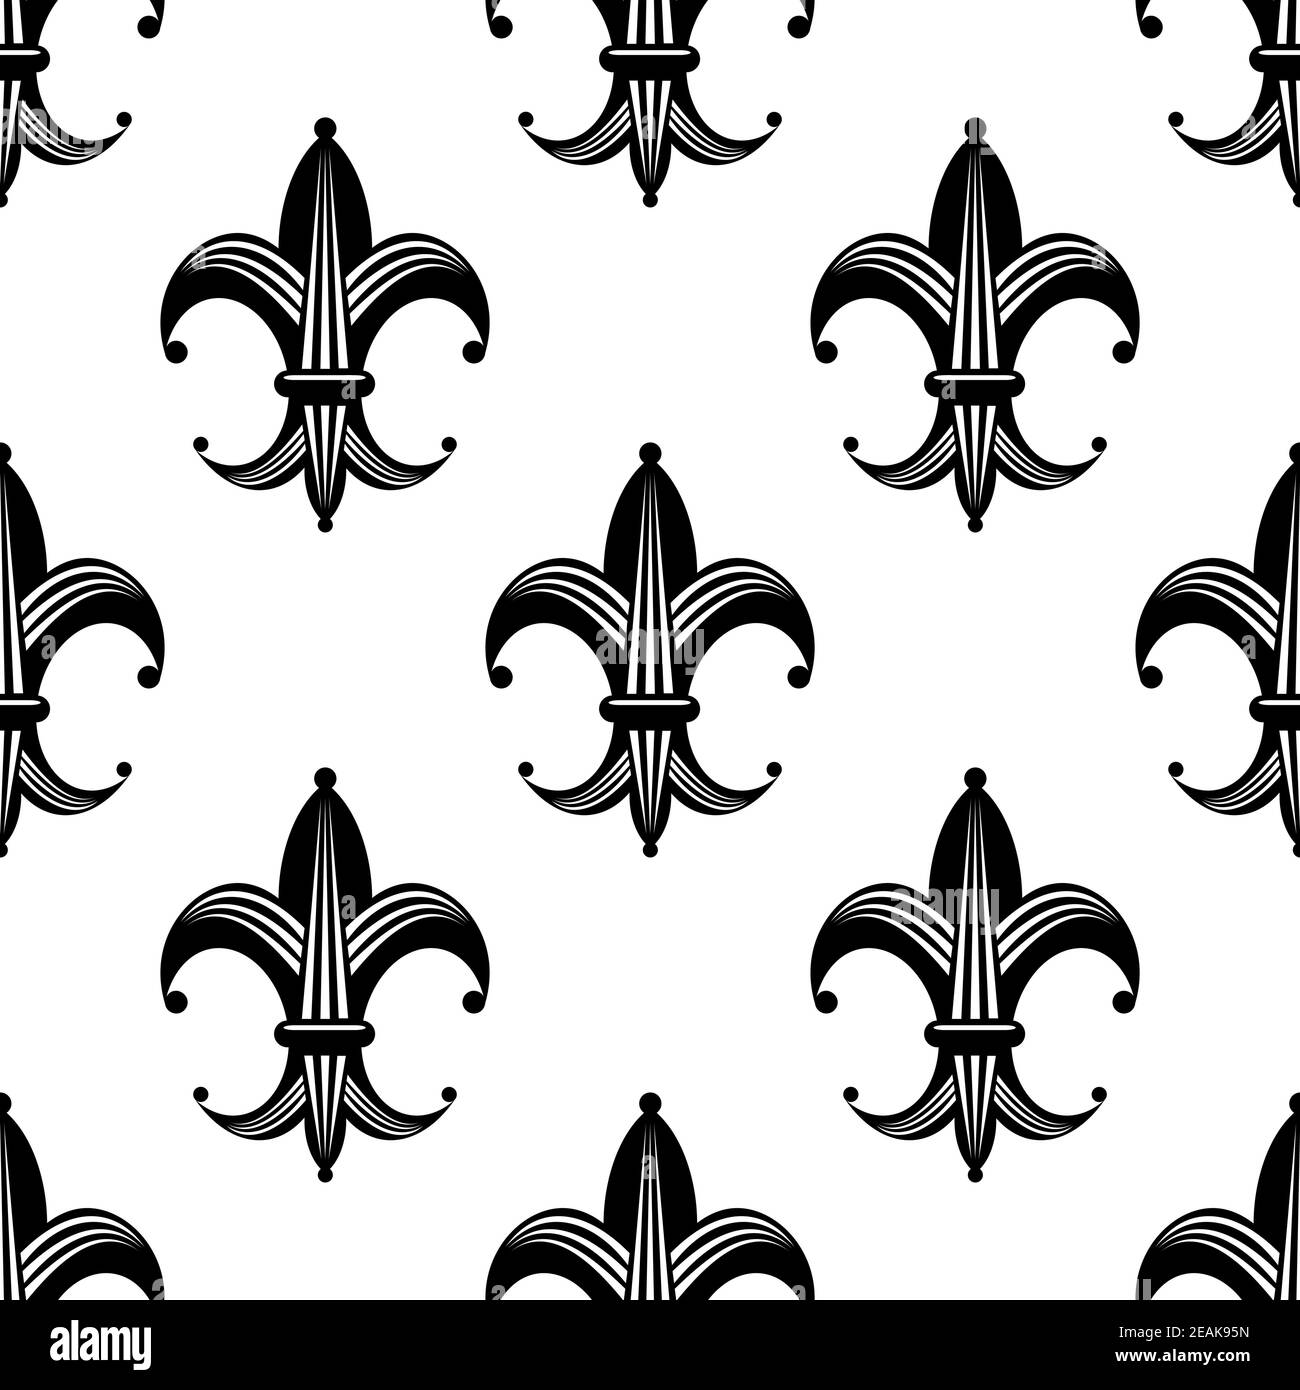 Seamless bold stylized fleur de lys pattern with a repeat black and white motif in square format for heraldry design Stock Vector